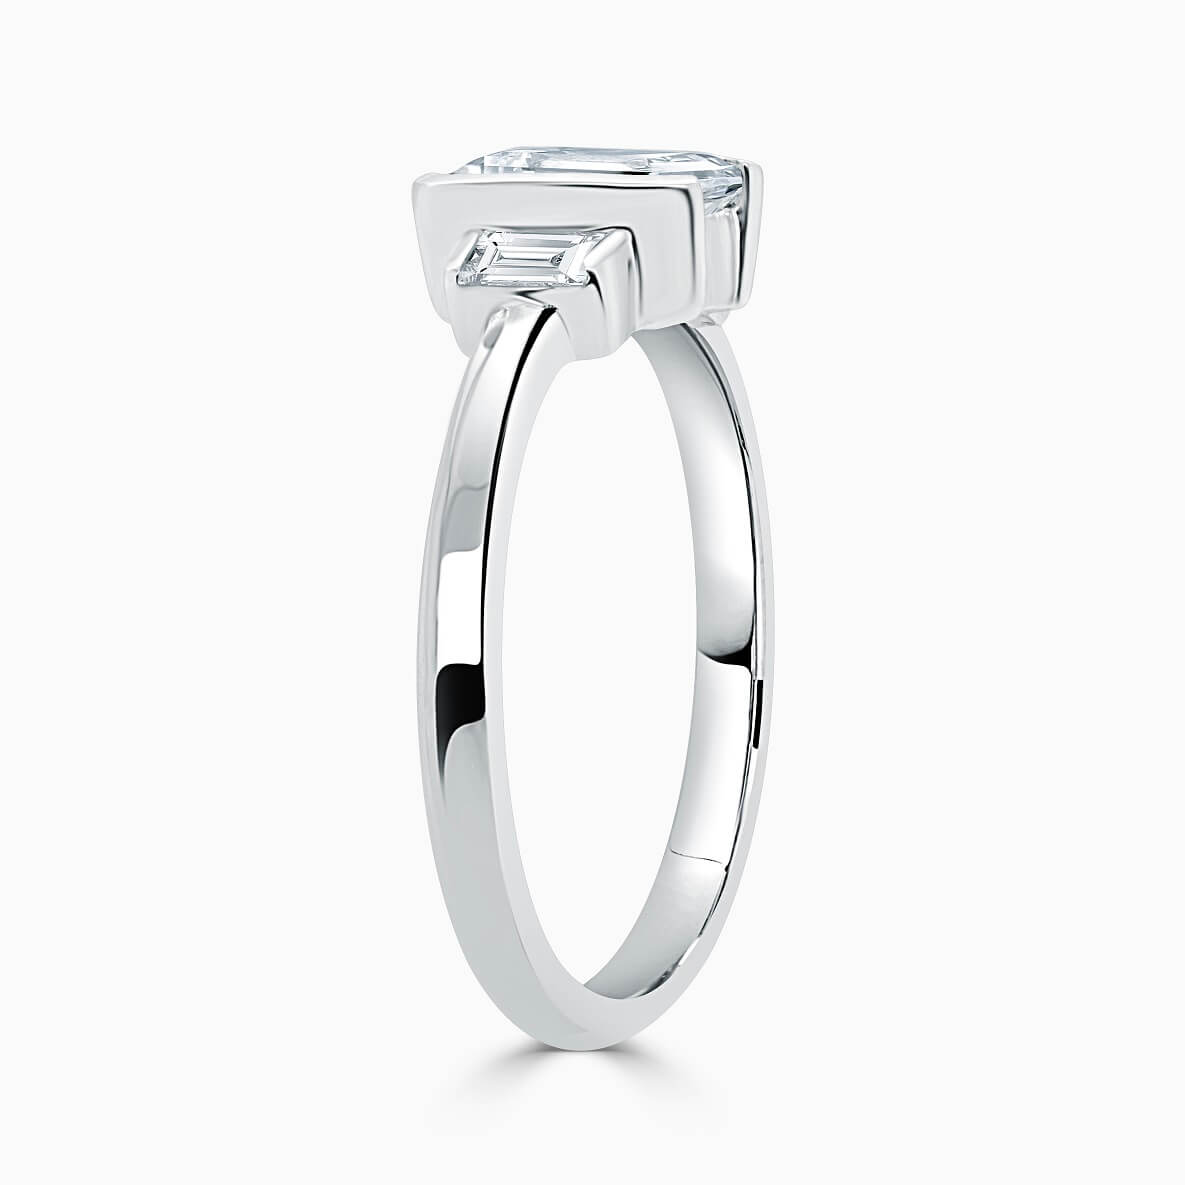 18ct White Gold Radiant Cut Art Deco 3 Stone With Baguettes Engagement Ring